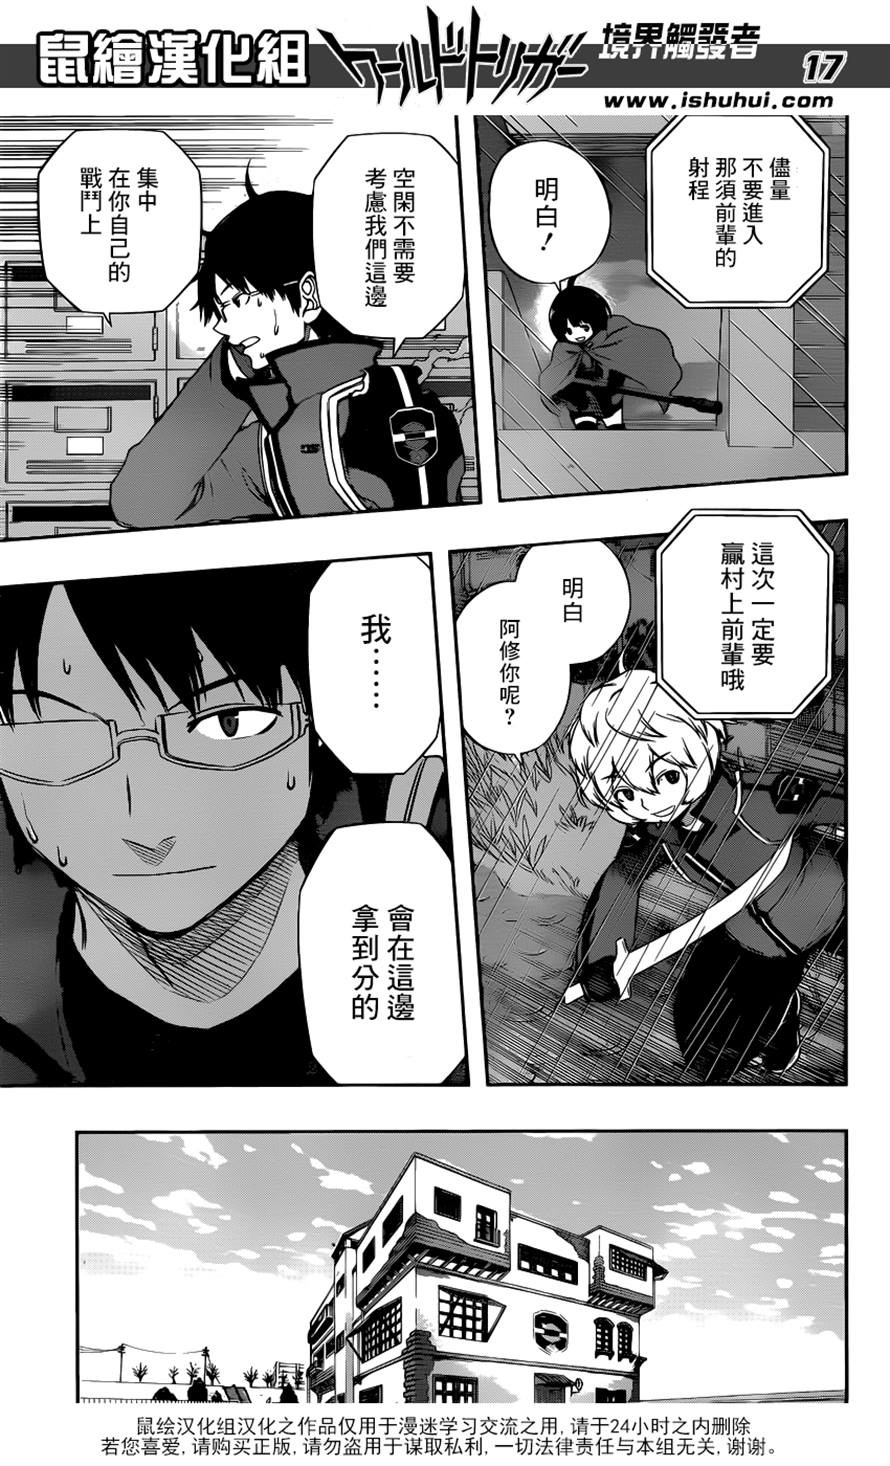 World Trigger - Chapter 97 - Page 17